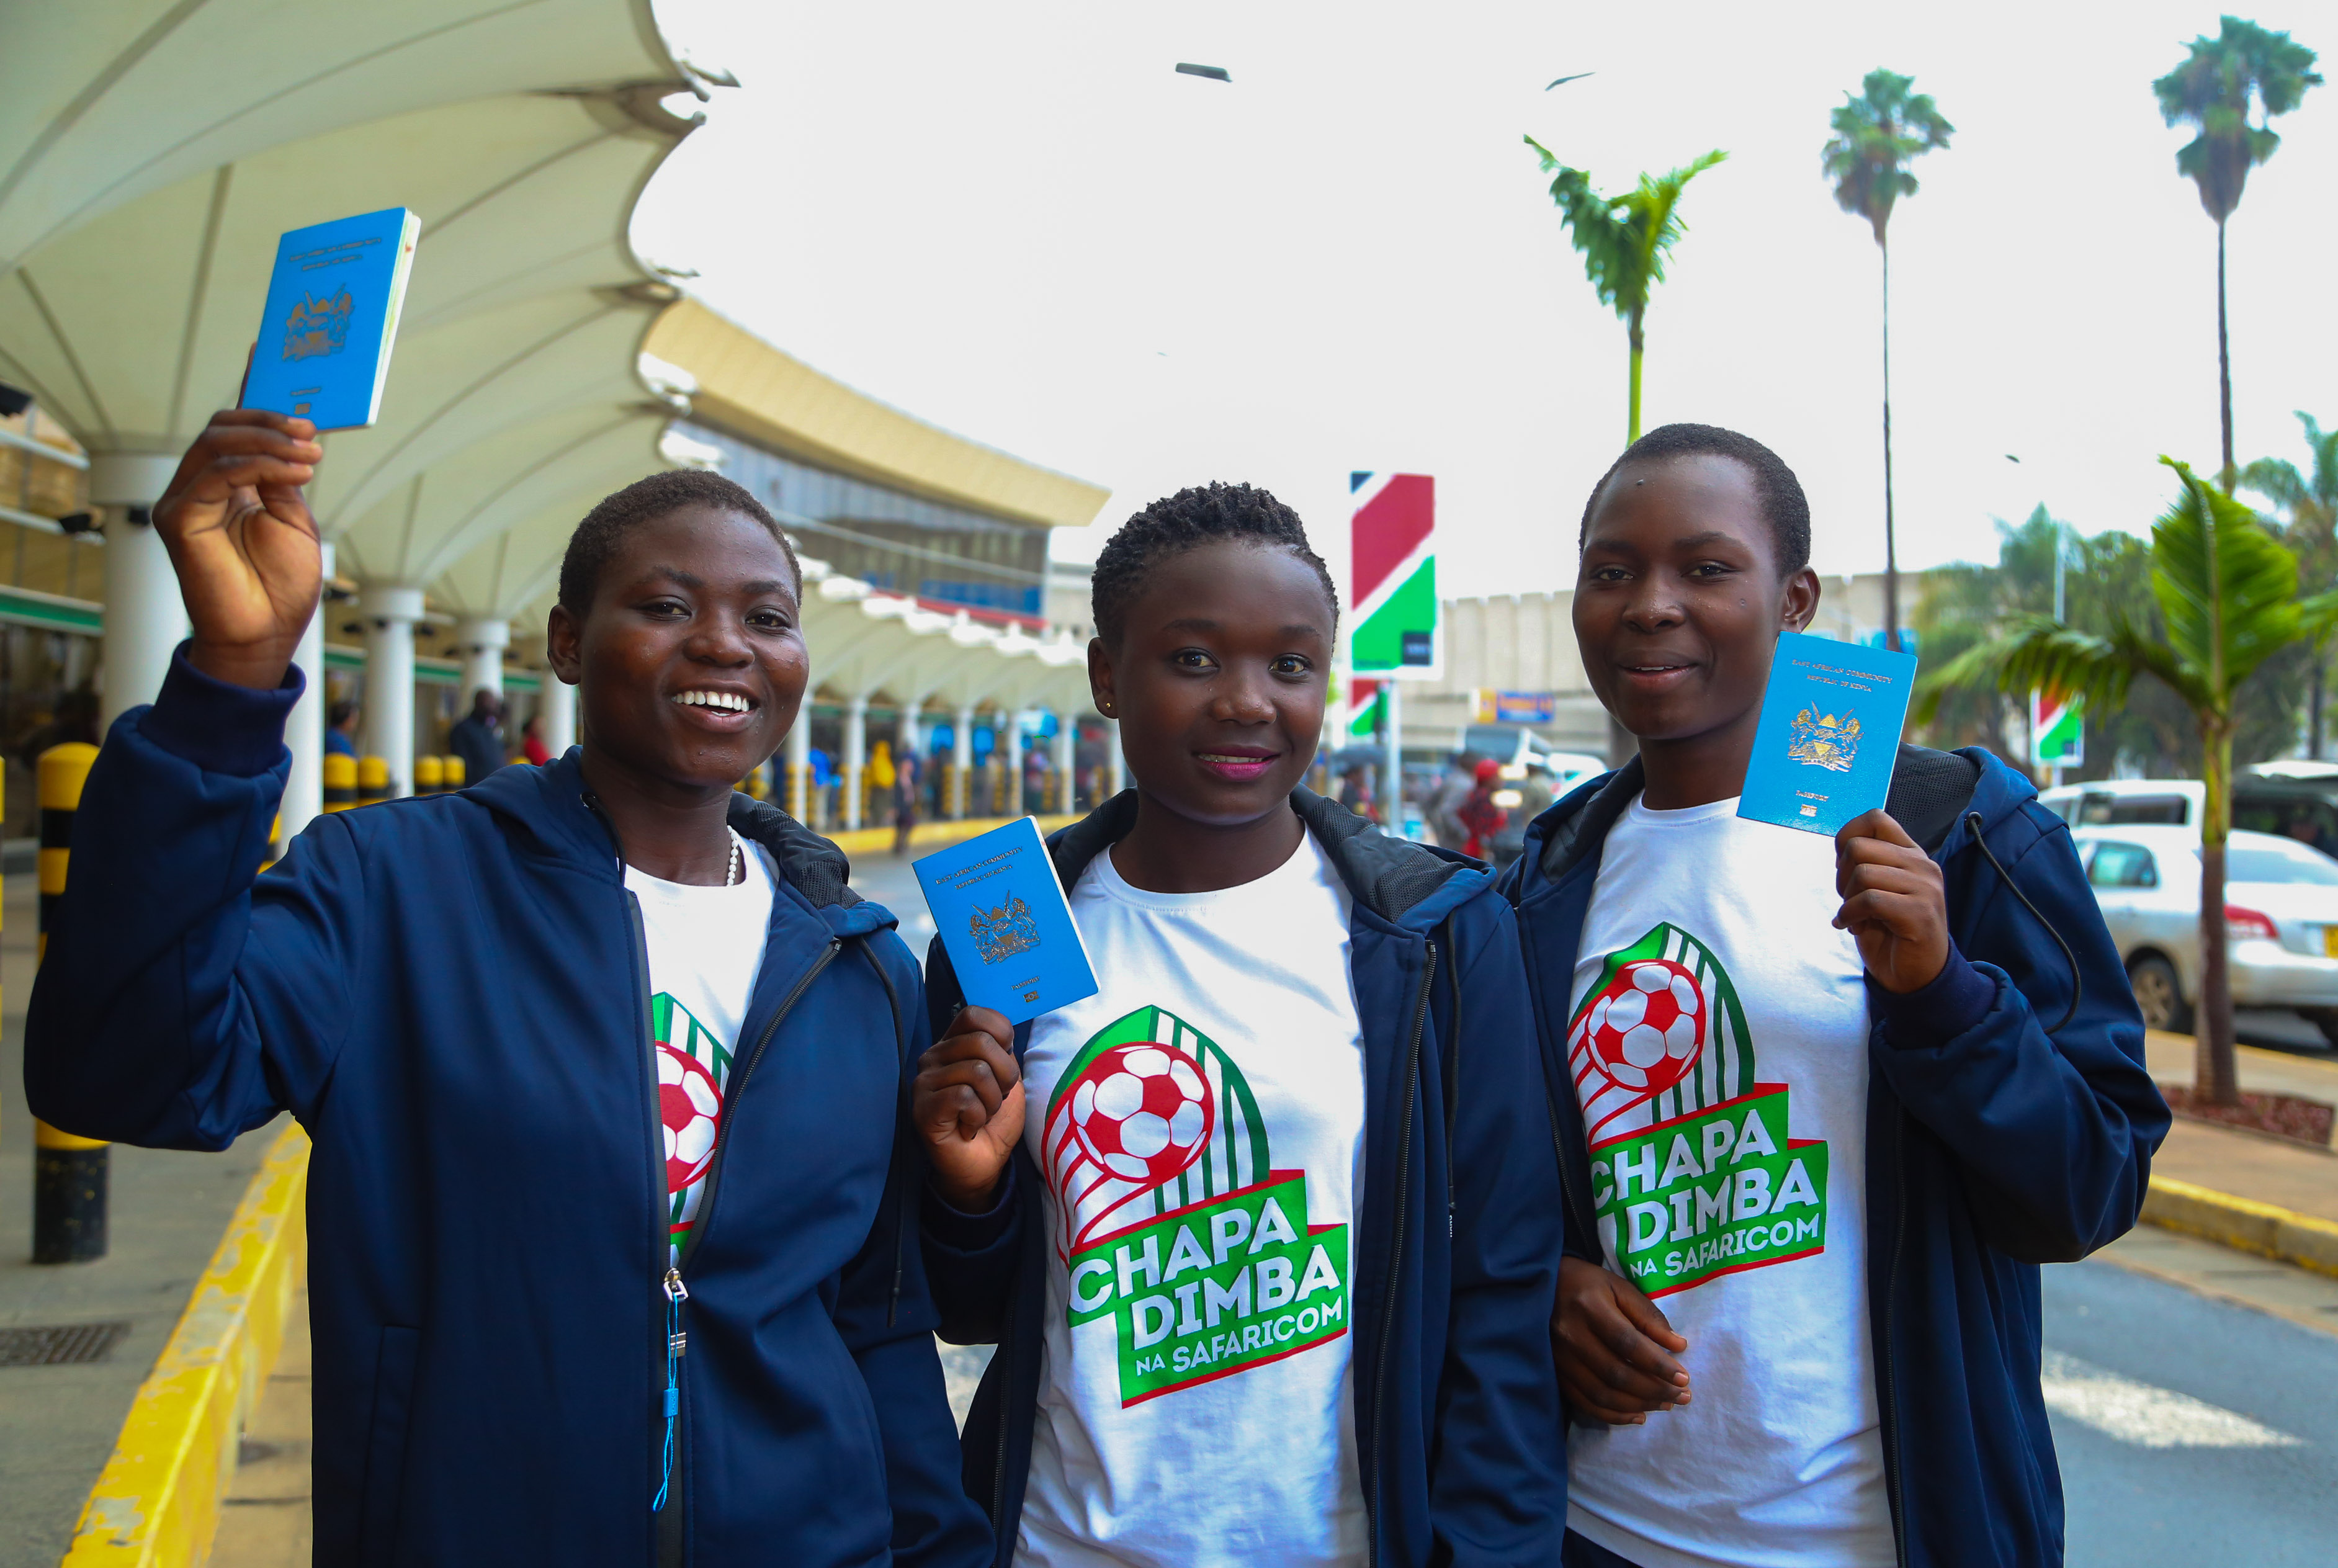 Safaricom Chapa Dimba Winners; Plateau Queens players Mary Okumu (Left), in company of her mates Jovyntine Simbe and Christine Awuor express their enthusiasm on a photo-call, vibrantly displaying their passports ahead of their travel to London at the Jomo Kenyatta International Airport - Bizna 